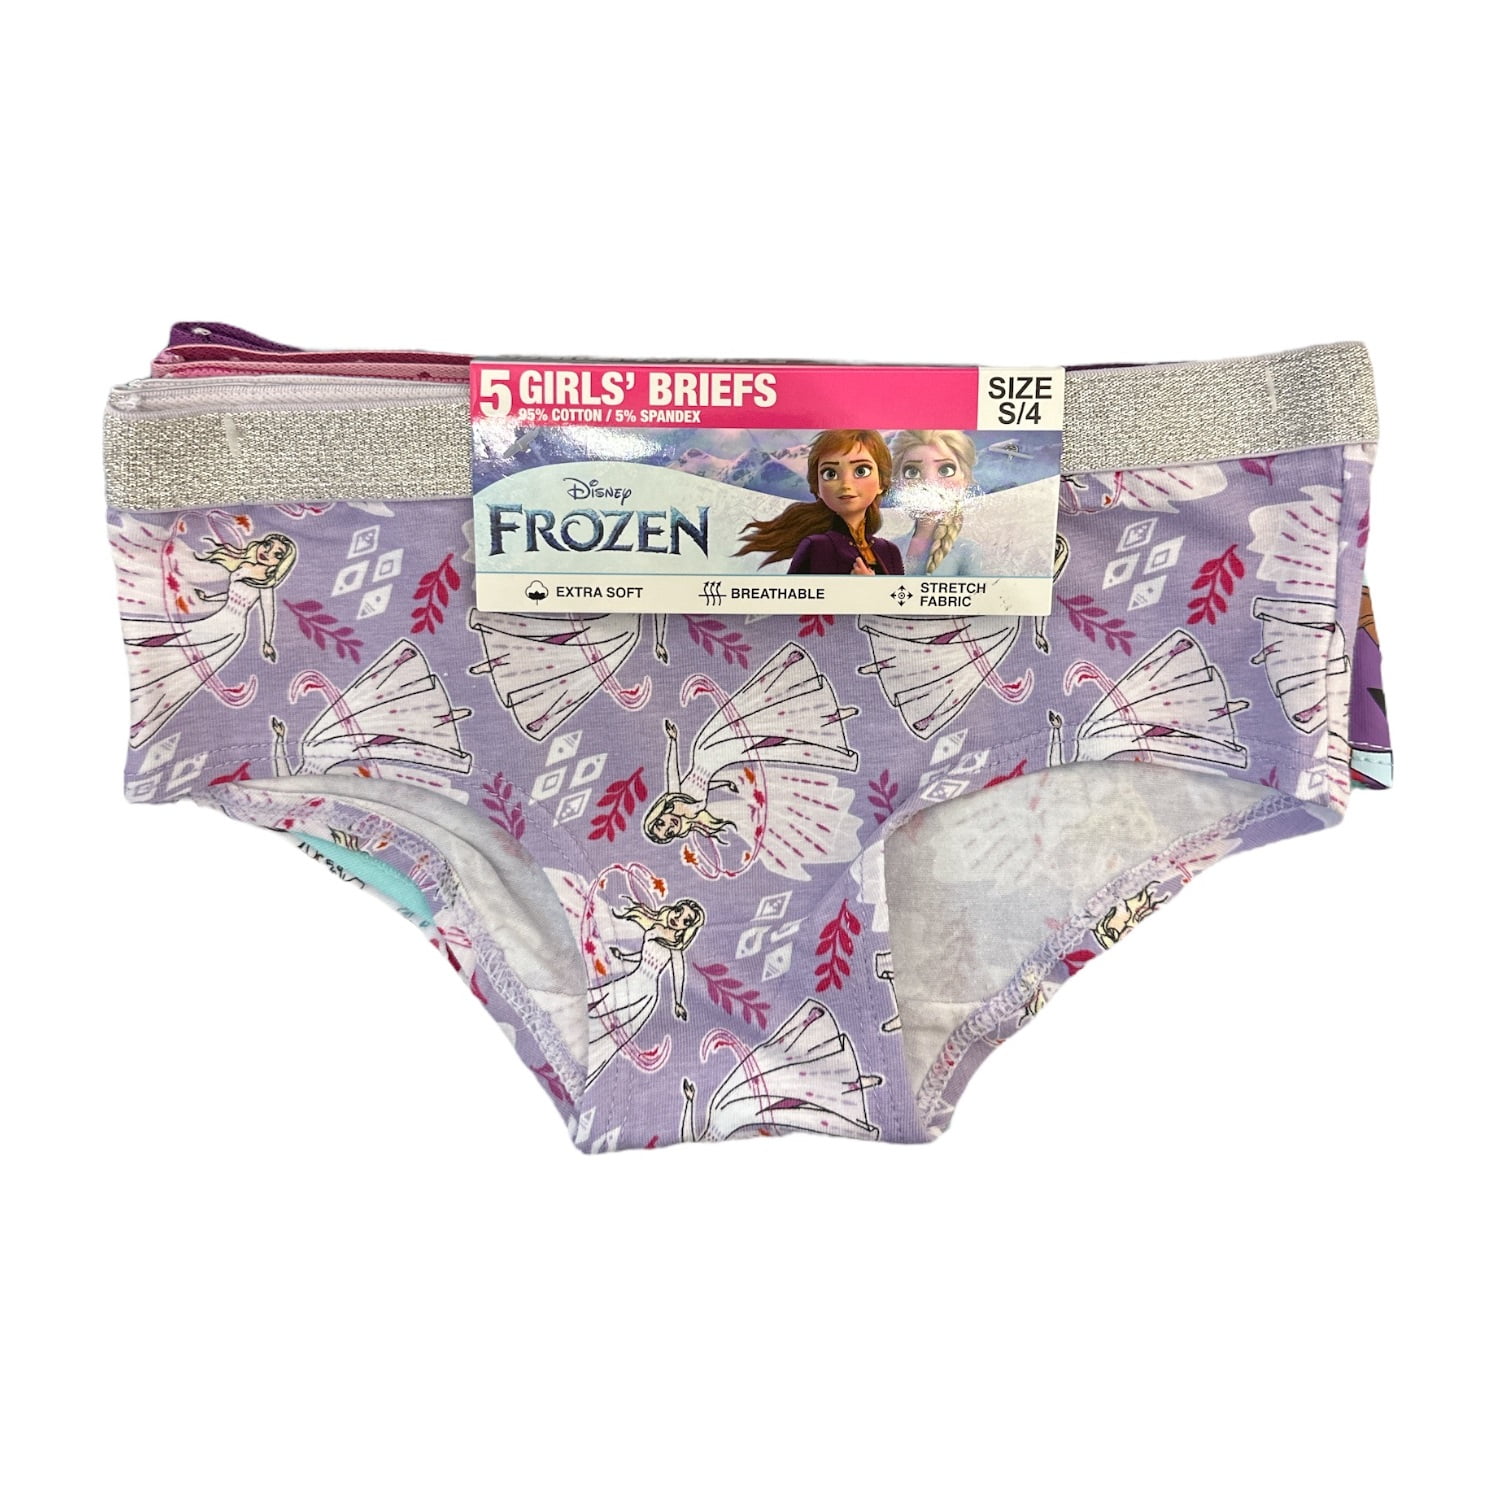 Buy Disney Frozen Briefs 5 Pack (1.5-10yrs) from the Laura Ashley